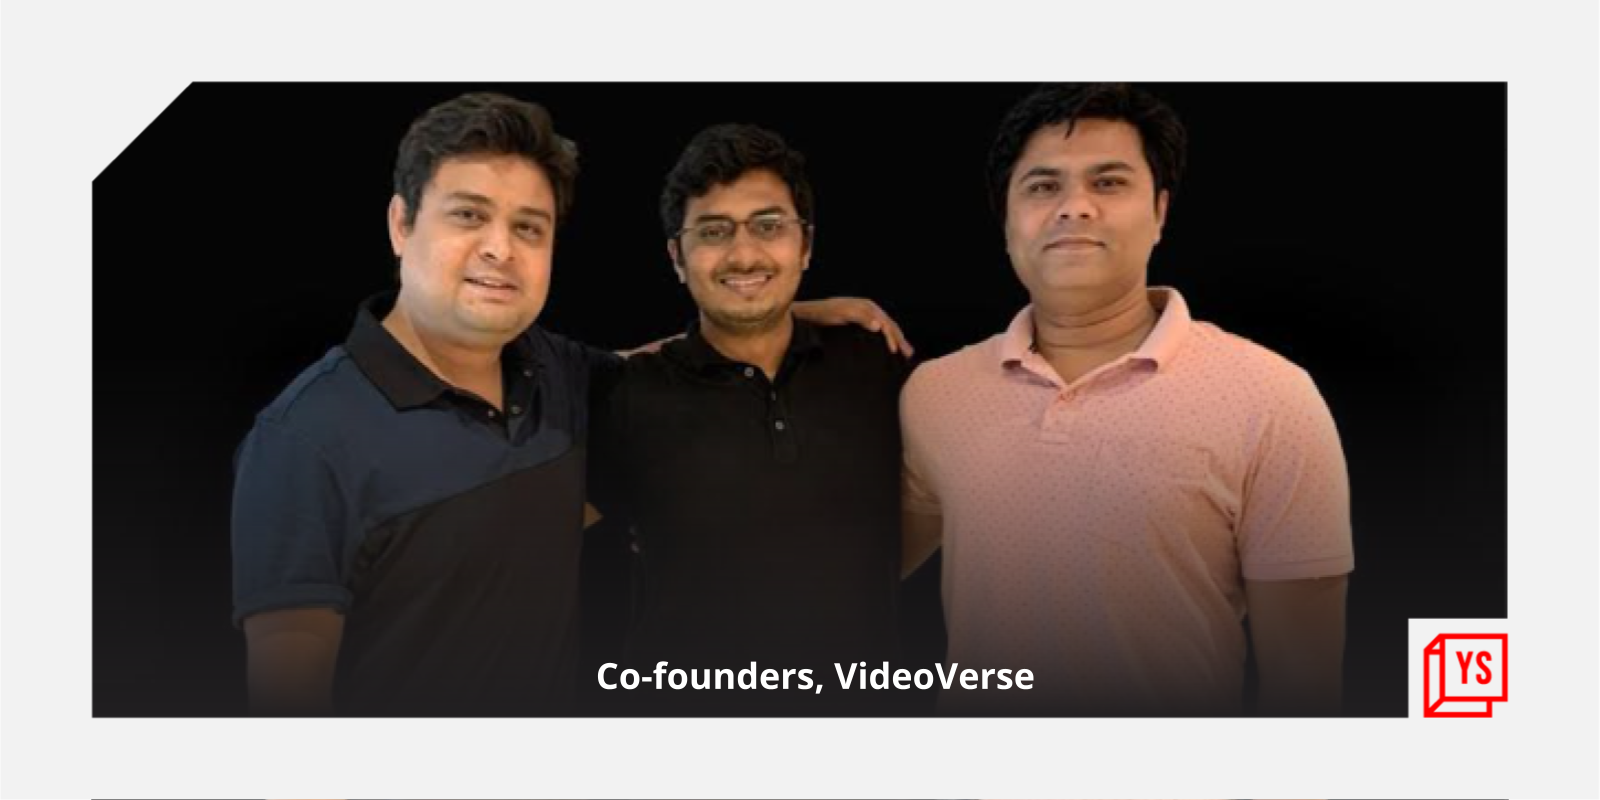 [Funding alert] VideoVerse raises $46.8M in Series B led by A91 Partners, Alpha Wave Global